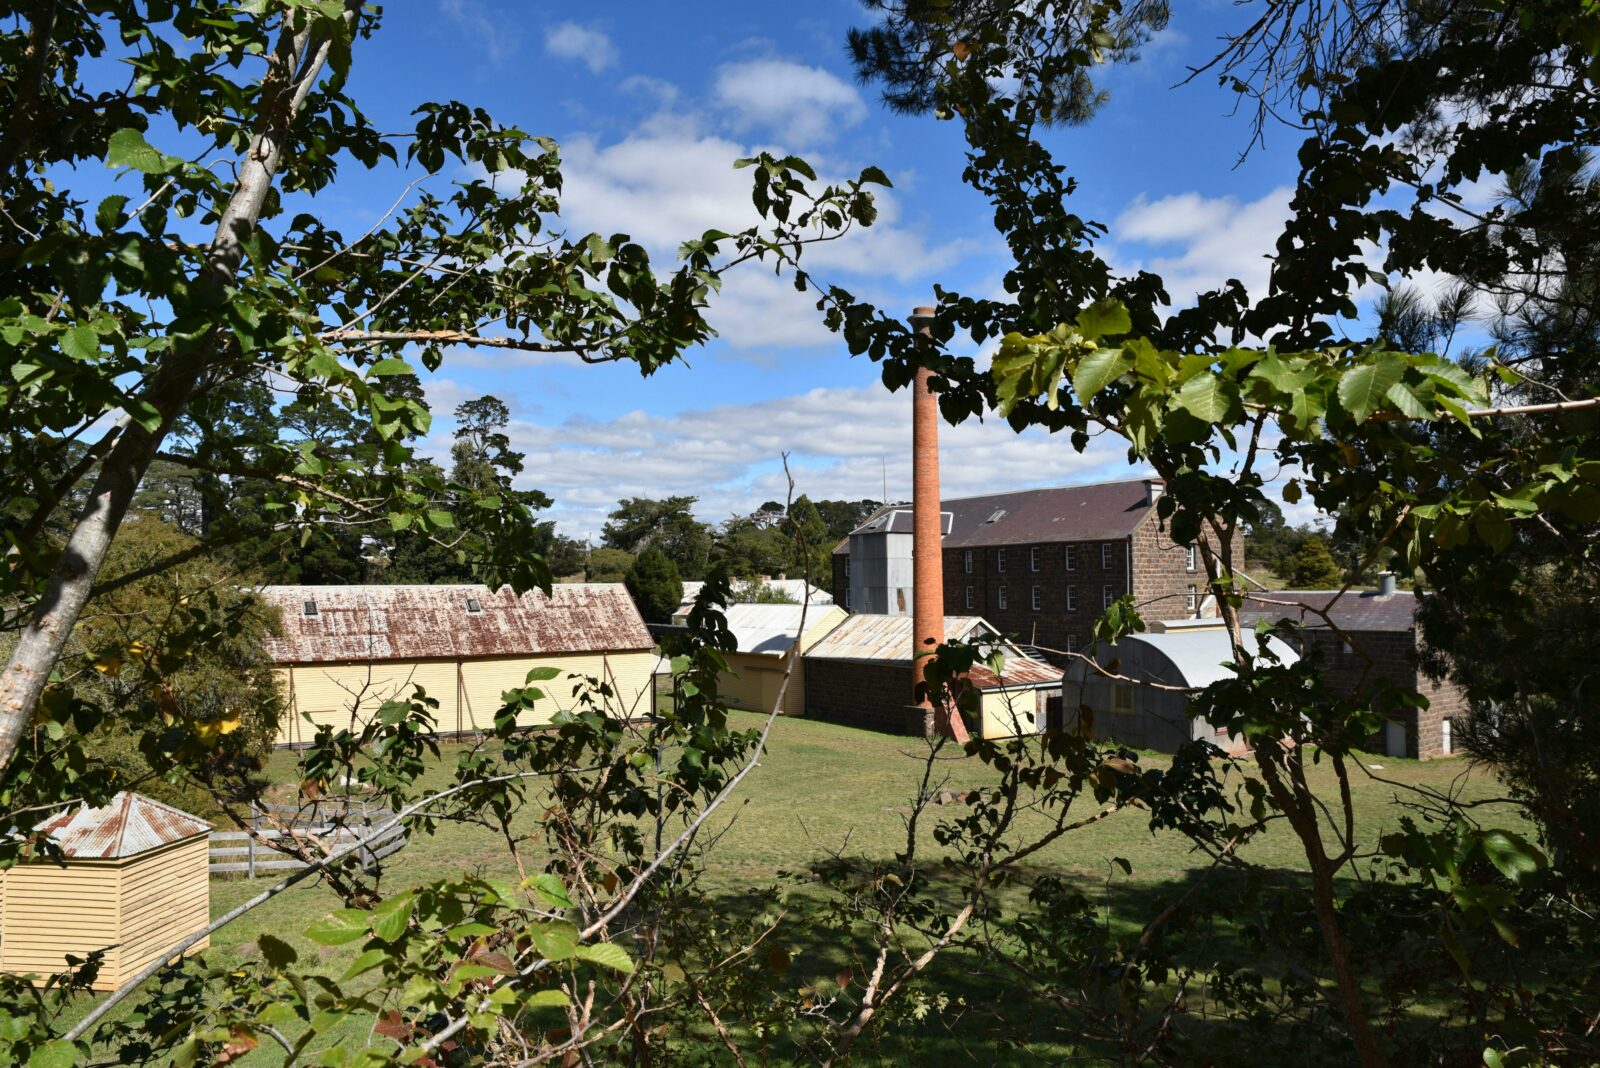 This photo show the bluestone mill, the large weatherboard granary and the tall red brick chimney